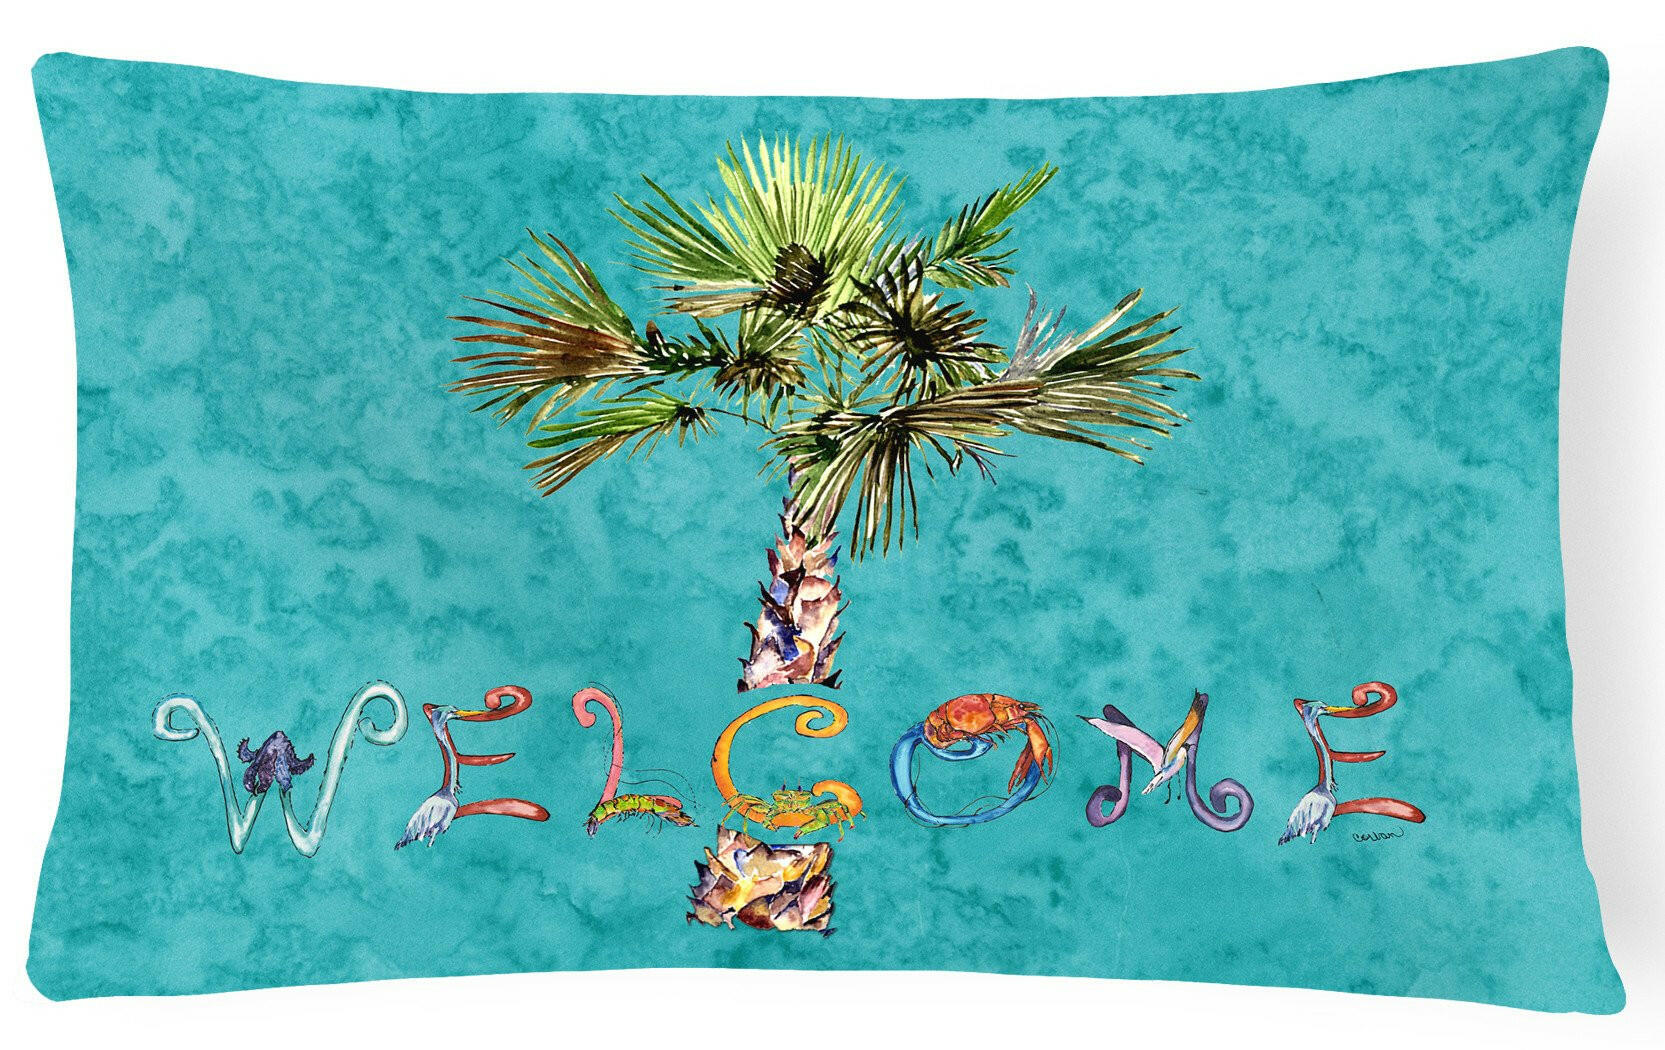 Welcome Palm Tree on Teal Canvas Fabric Decorative Pillow 8711PW1216 by Caroline's Treasures